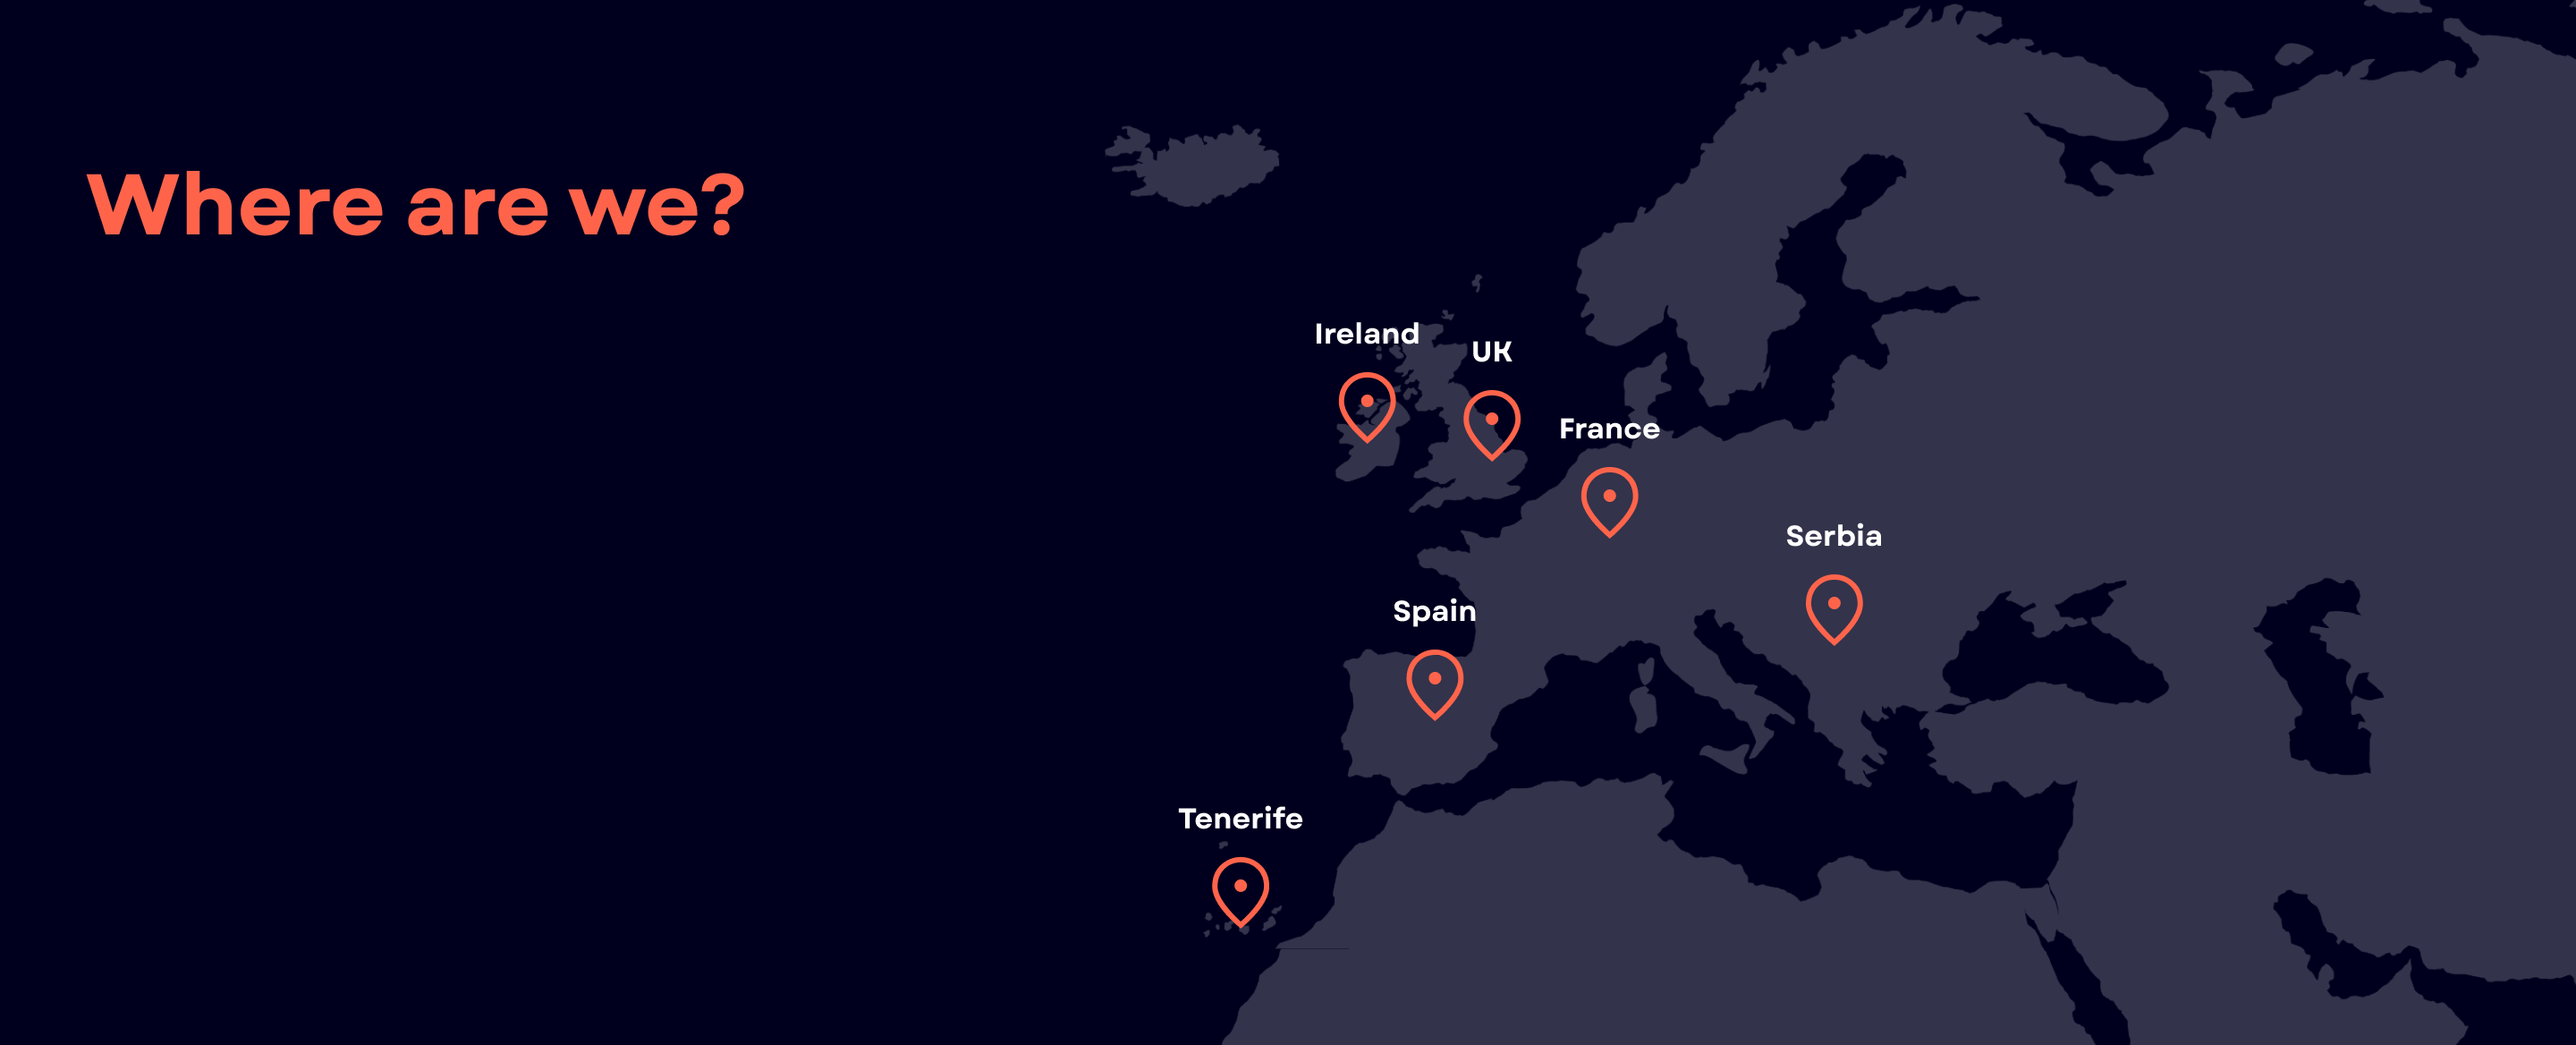 Map of Velocitech development hubs and business centres in Europe; Ireland, UK, France, Serbia, Spain, Tenerife.